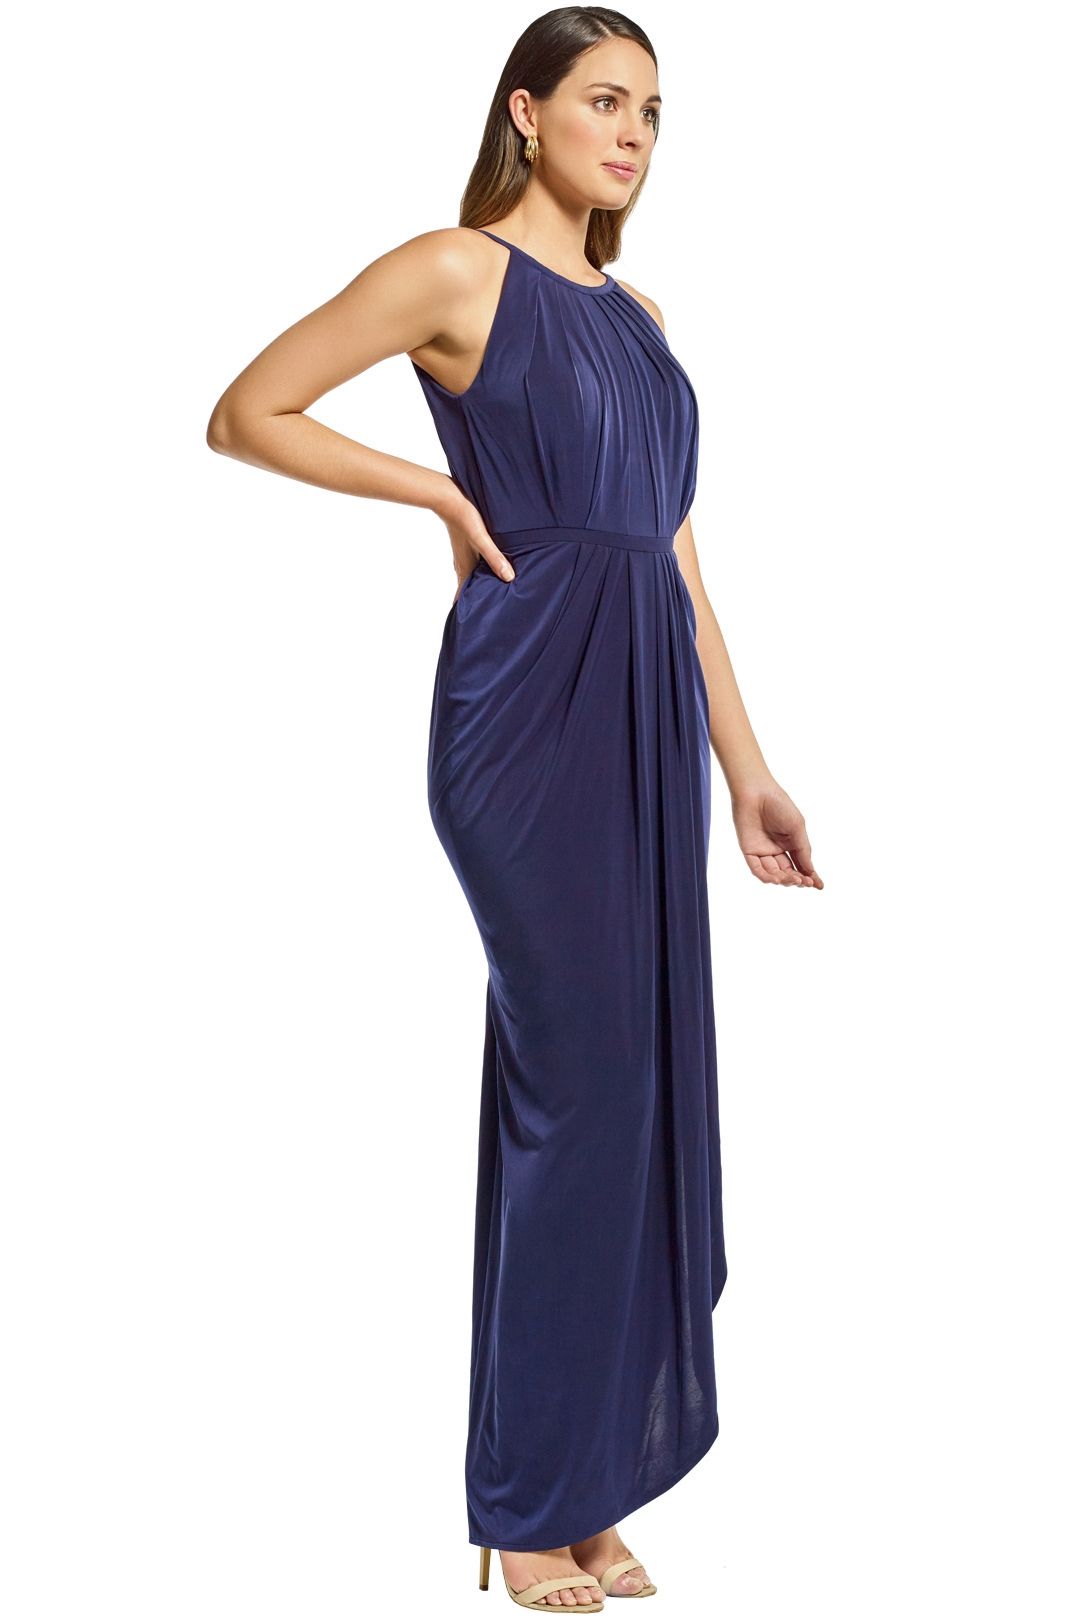 Tania Olsen - Sandra Ruched Gown - Navy - Side